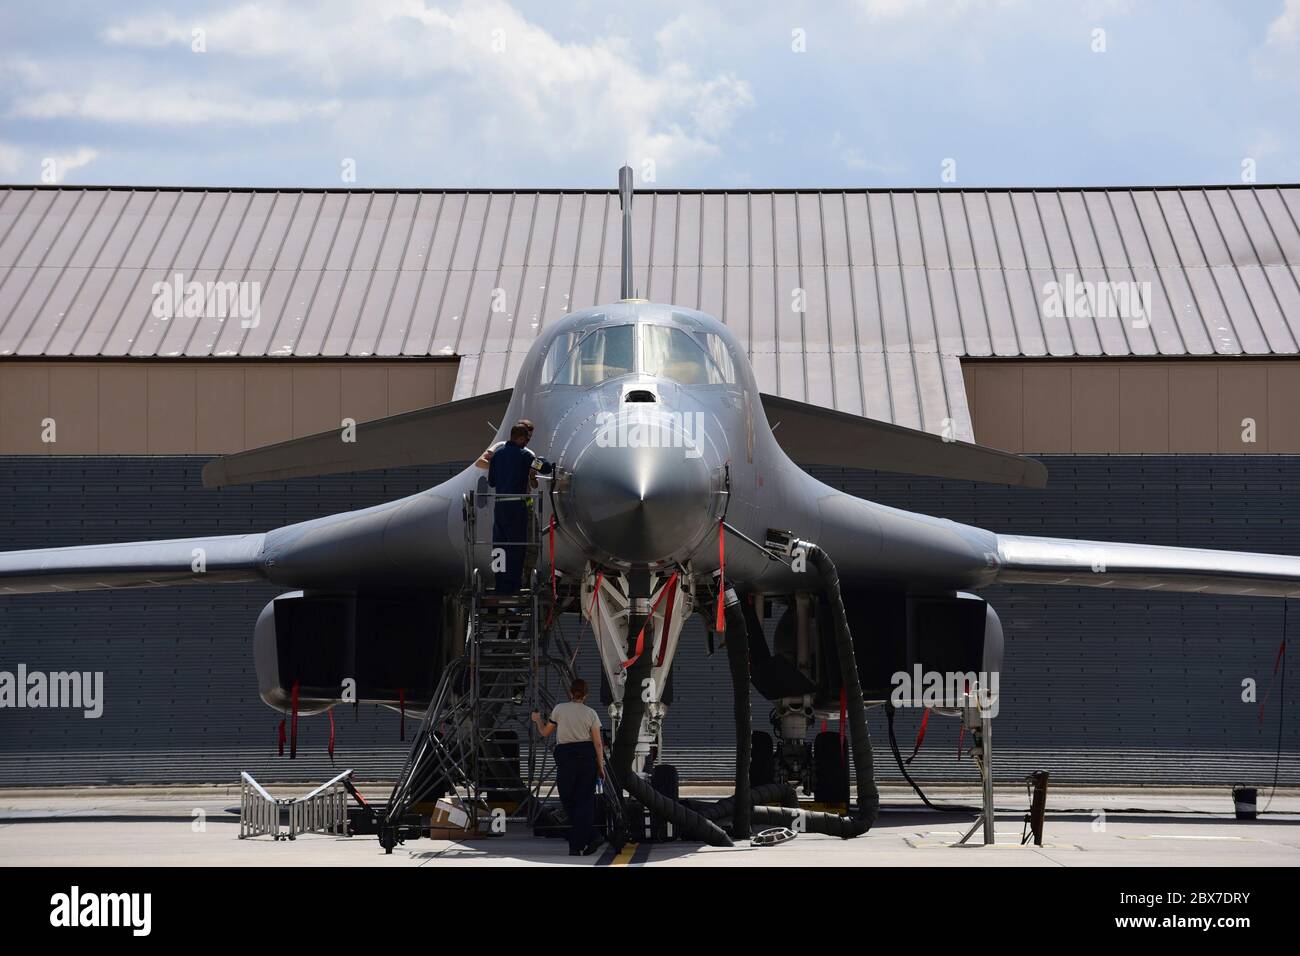 U.S. Air Force 28th Aircraft Maintenance Squadron airmen perform pre-flight checks on B-1B Lancer stealth bomber aircraft from the 28th Bomb Wing at Ellsworth Air Force Base August 7, 2017 near Rapid City, South Dakota. Stock Photo